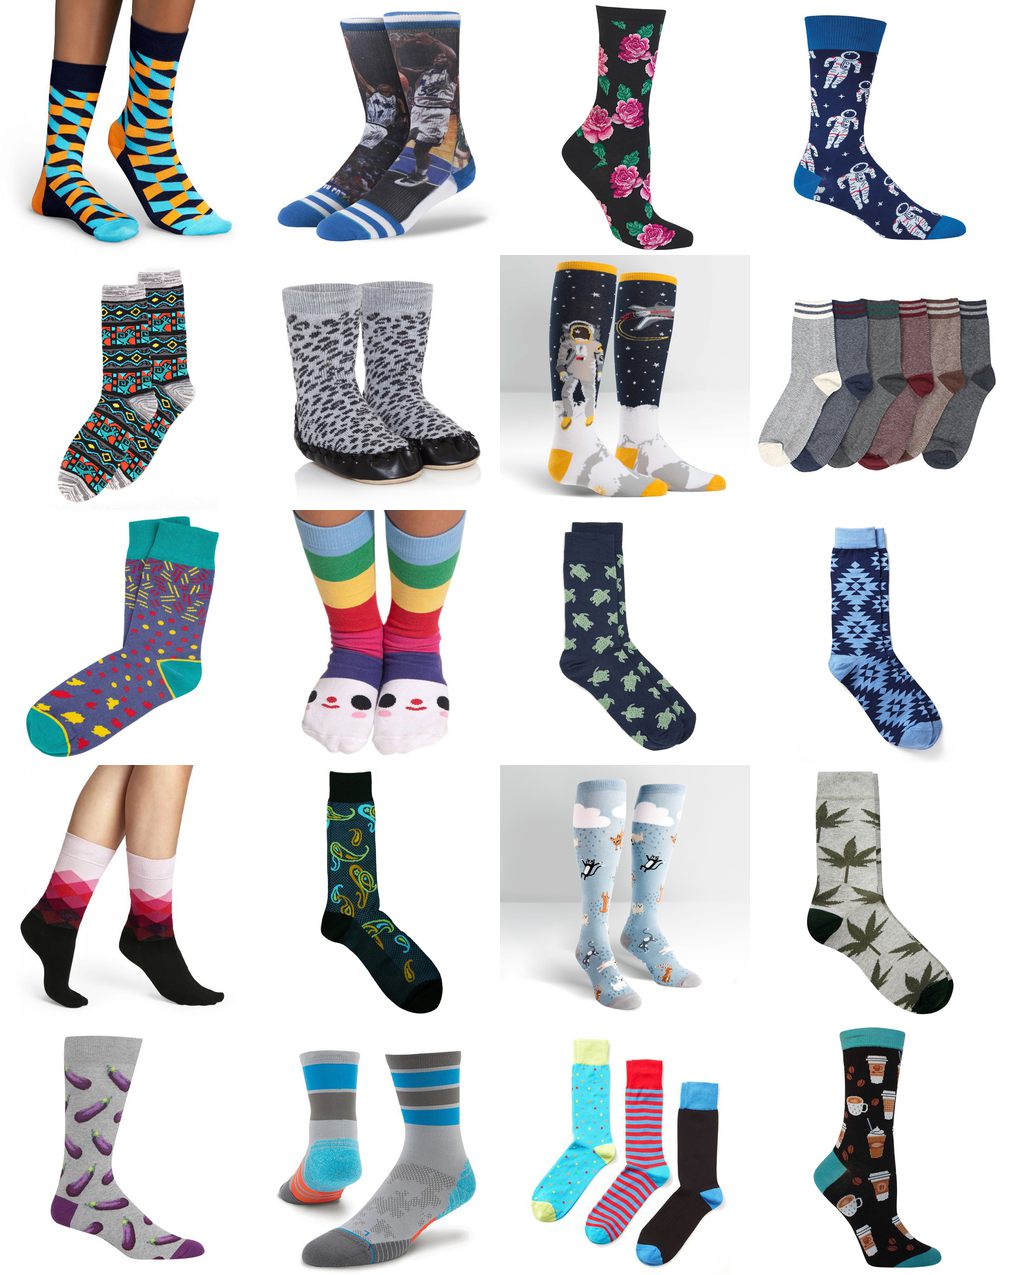 socks with cool designs